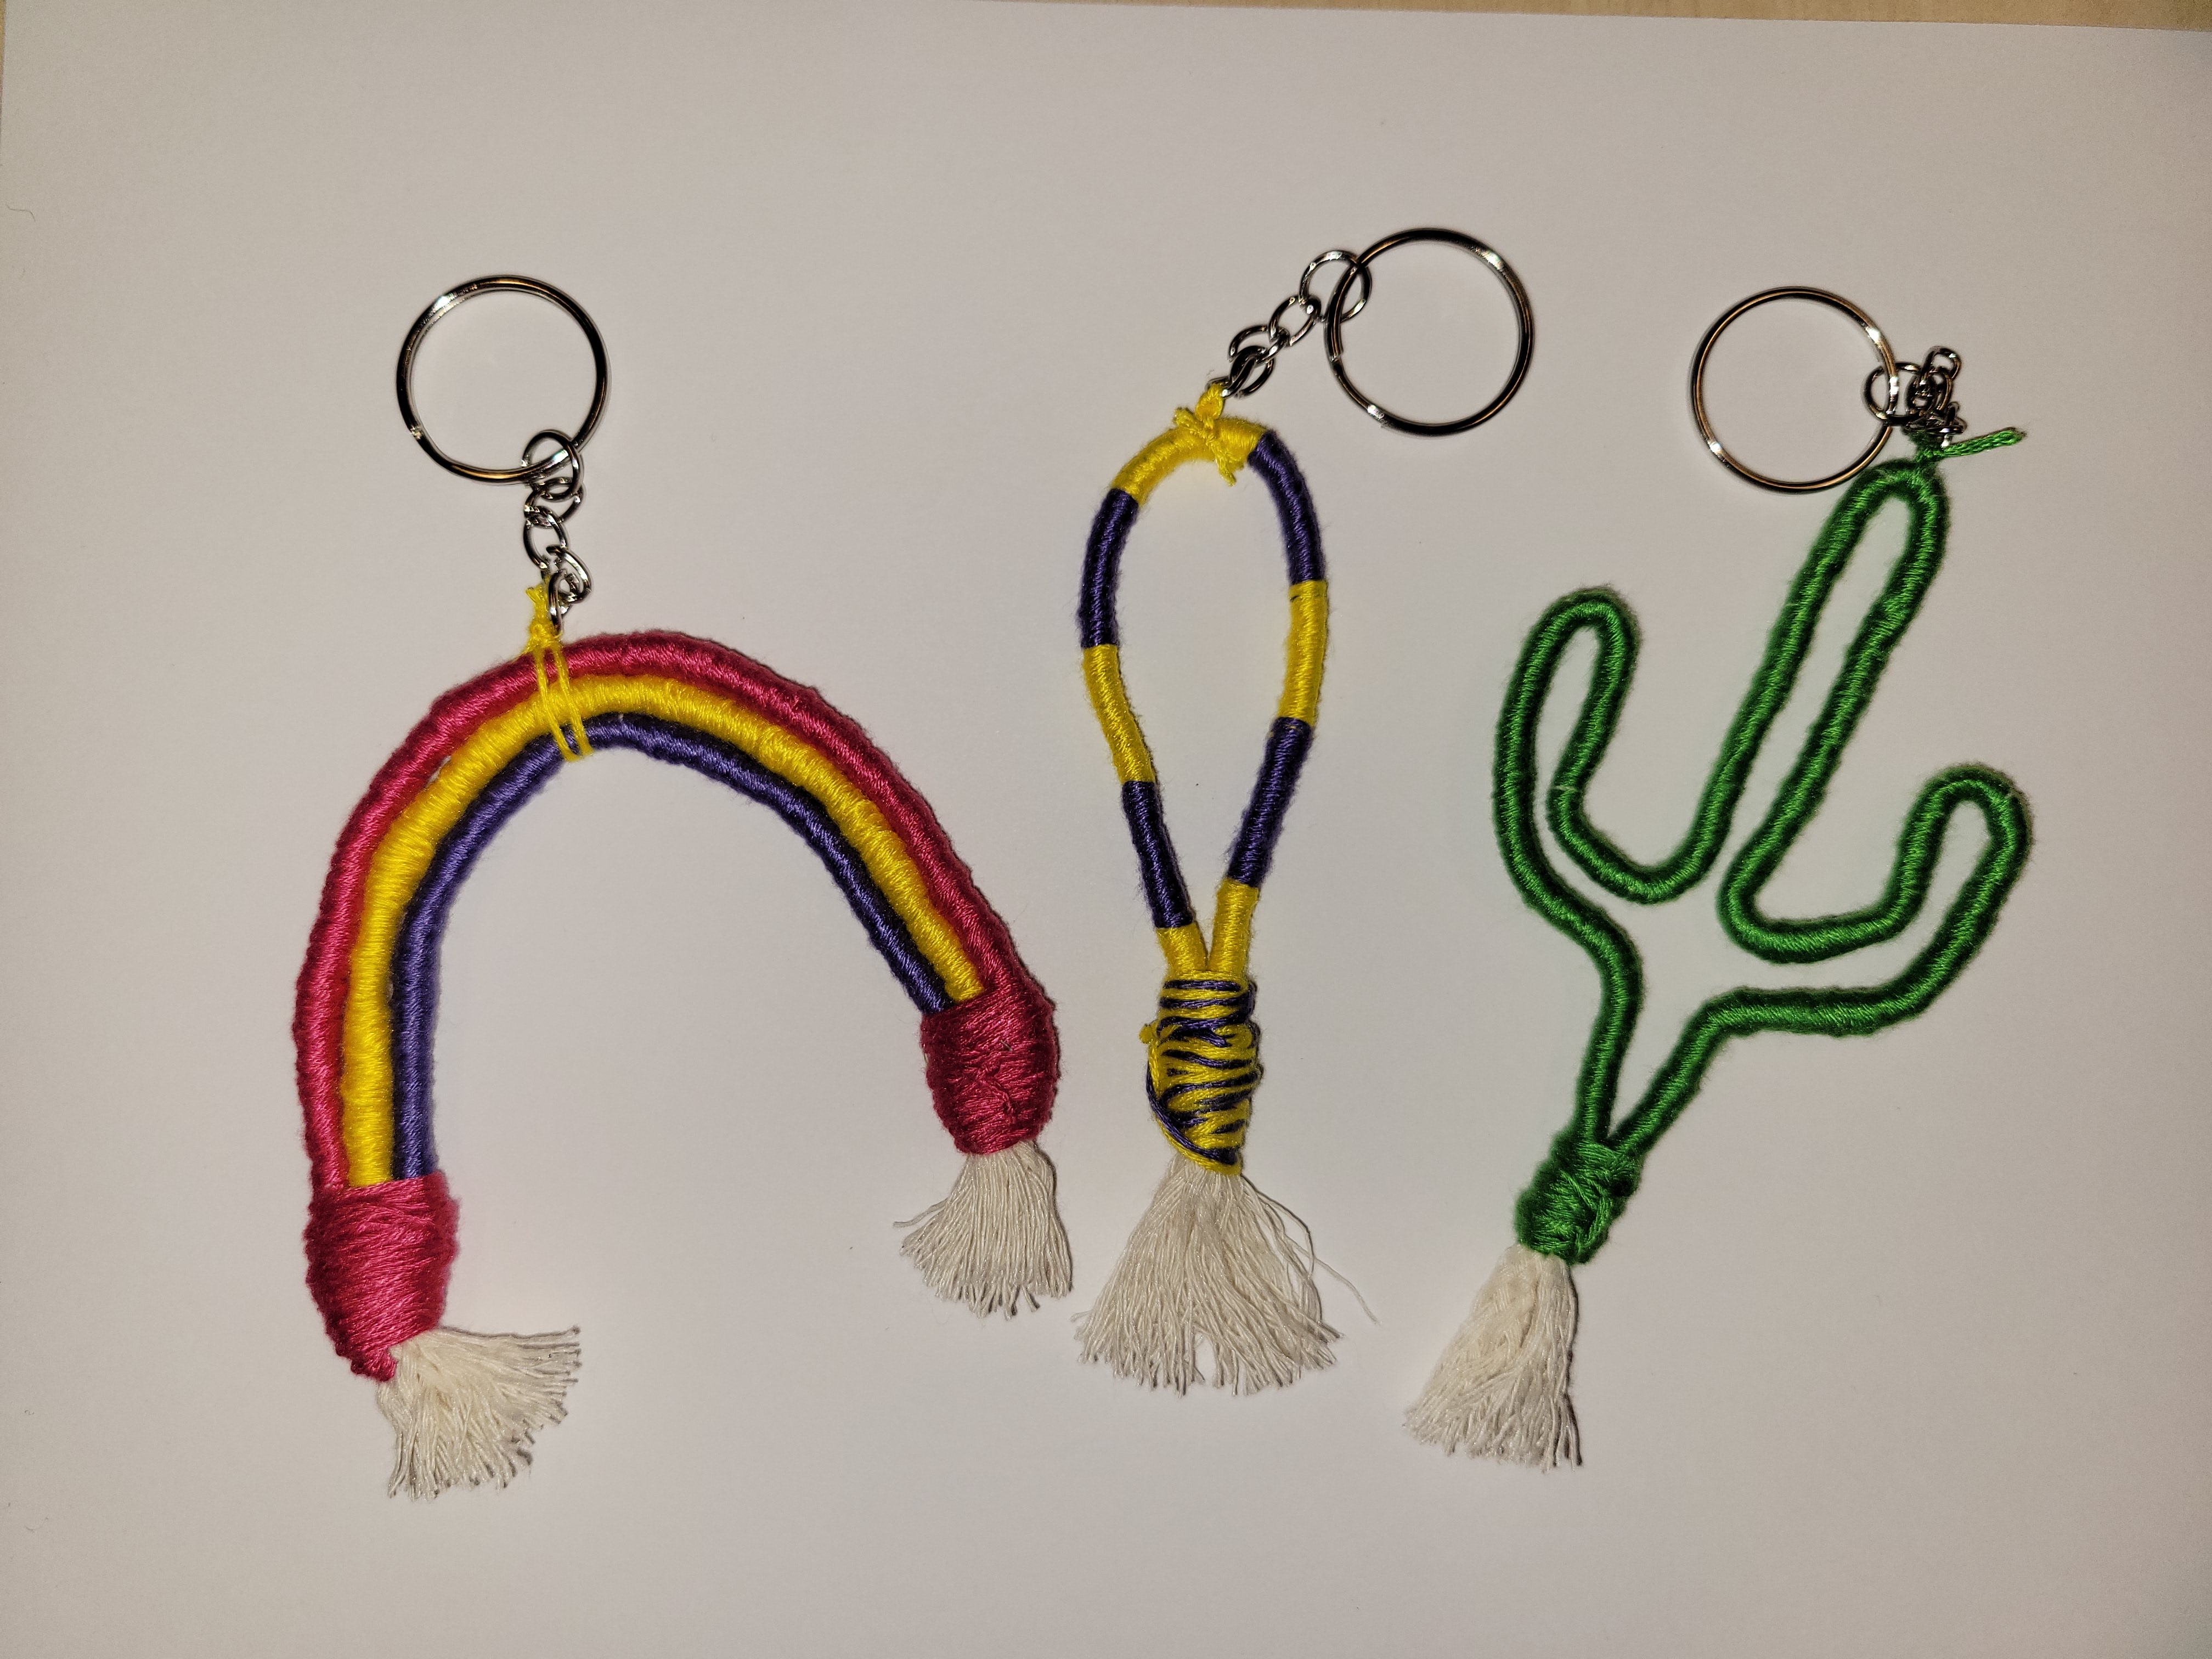 three samples of keychains